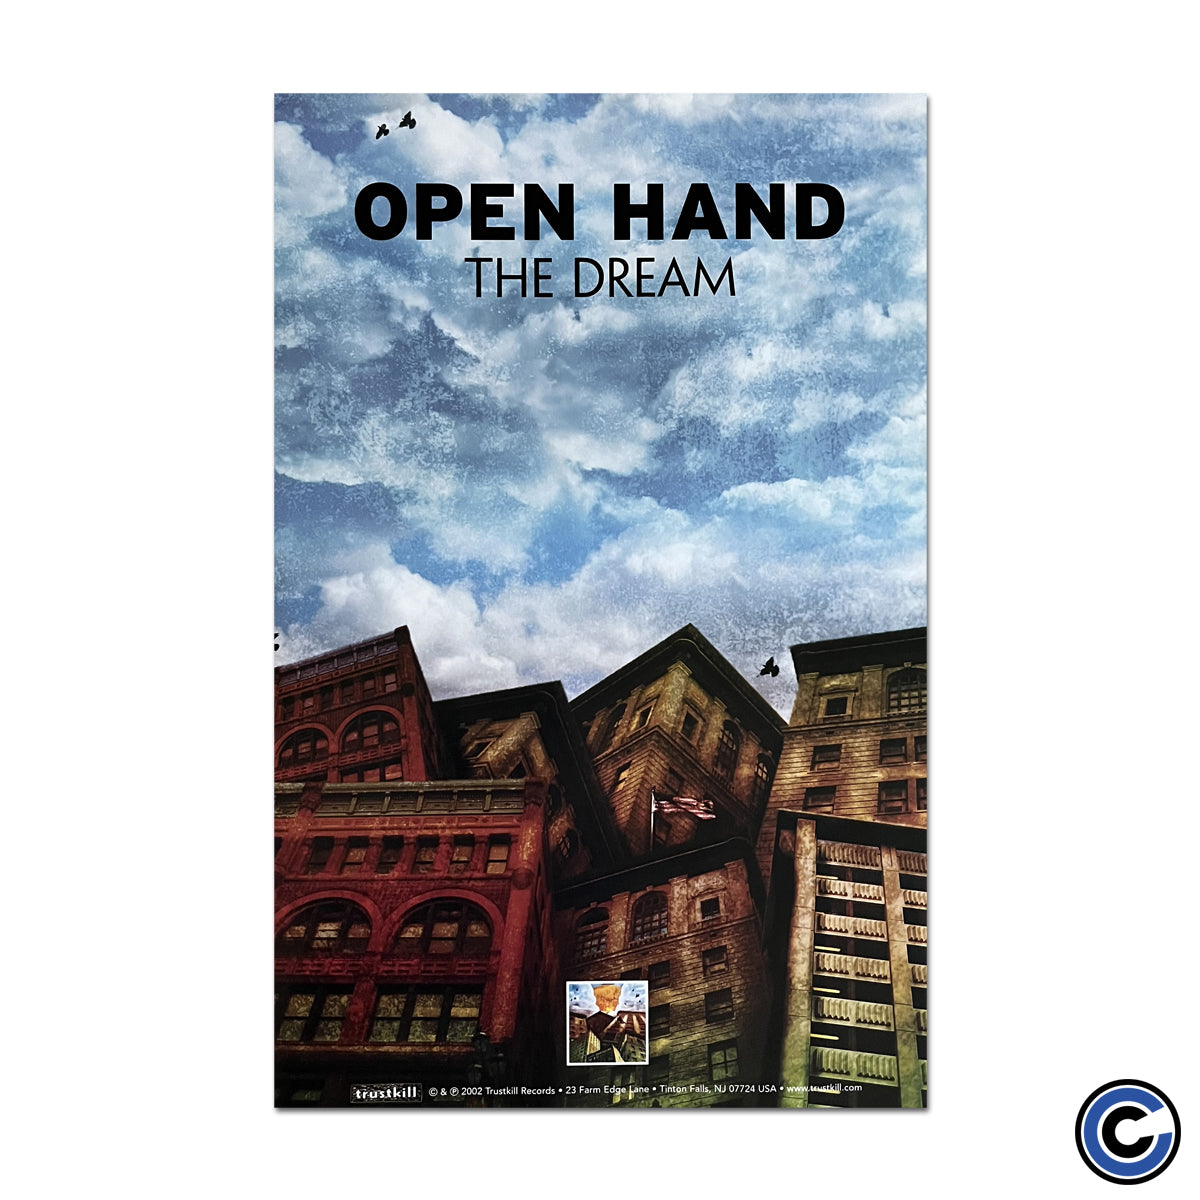 Open Hand "The Dream" Poster